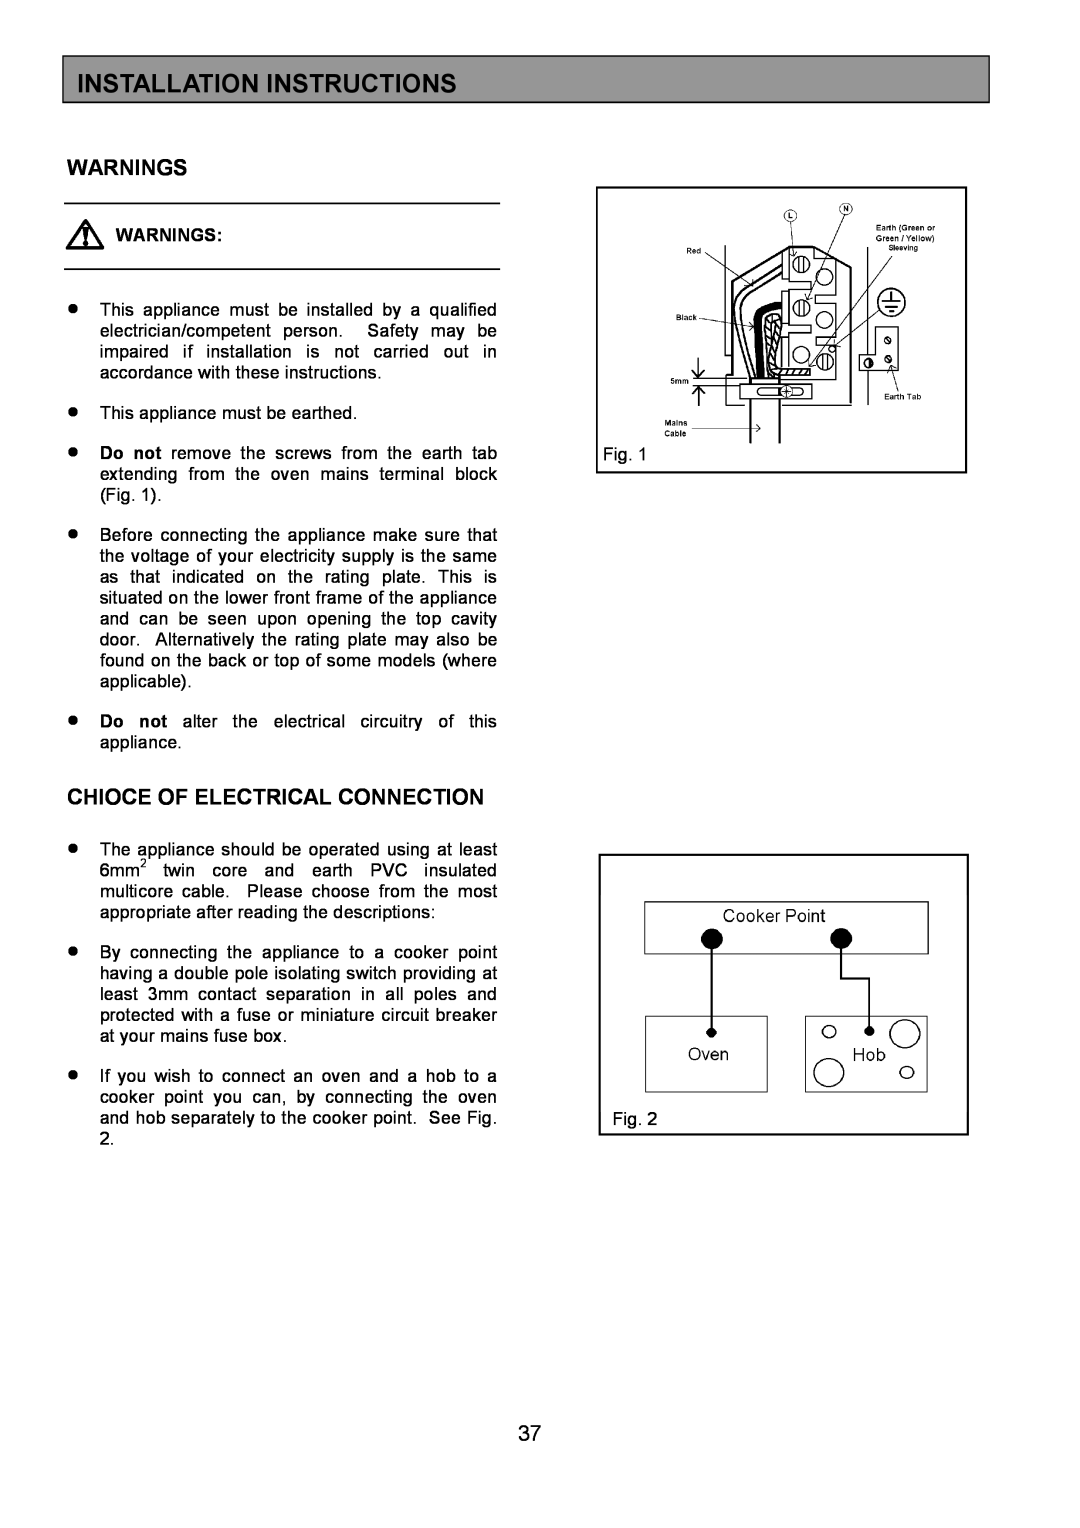 AEG 3210 BU installation instructions Installation Instructions, Warnings, Chioce Of Electrical Connection 